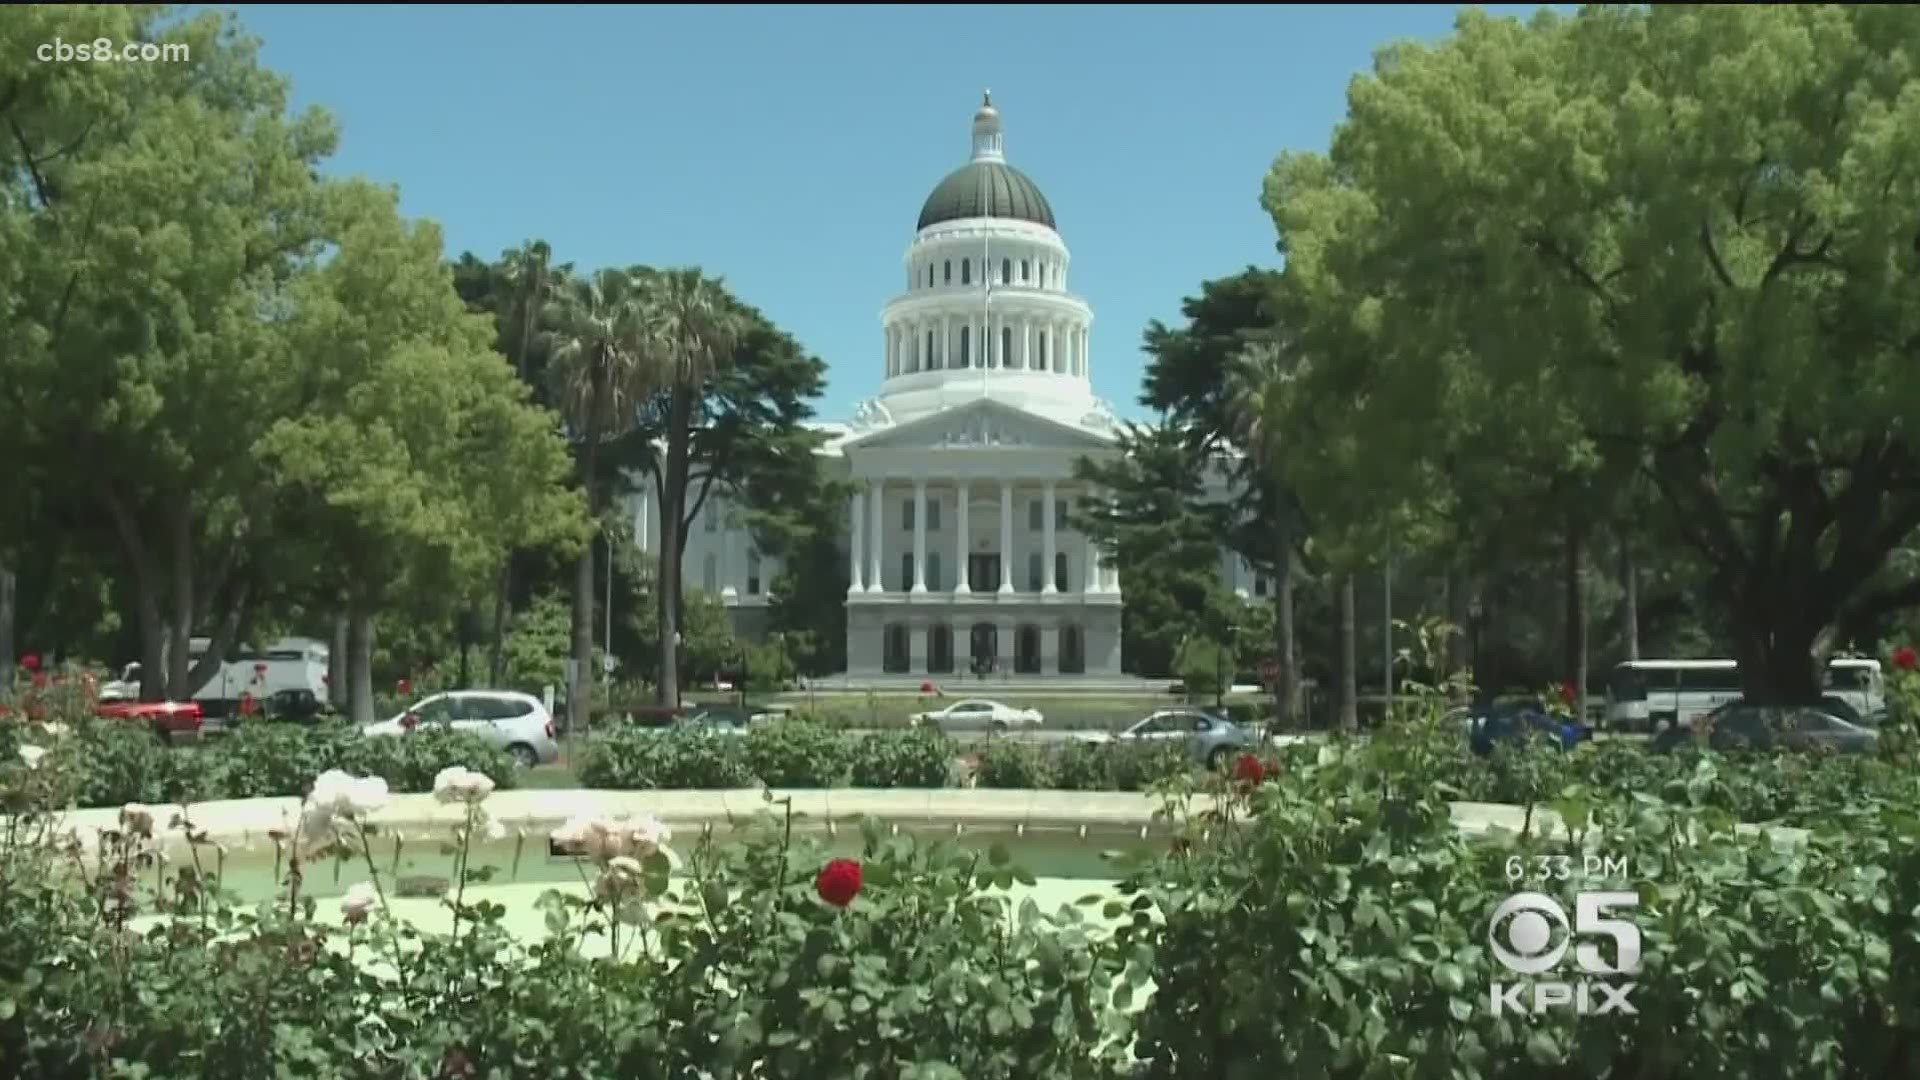 Close to two dozen lawmakers - Democrats and Republicans from both houses - are asking Gov. Newsom to call a special session of at least two months.